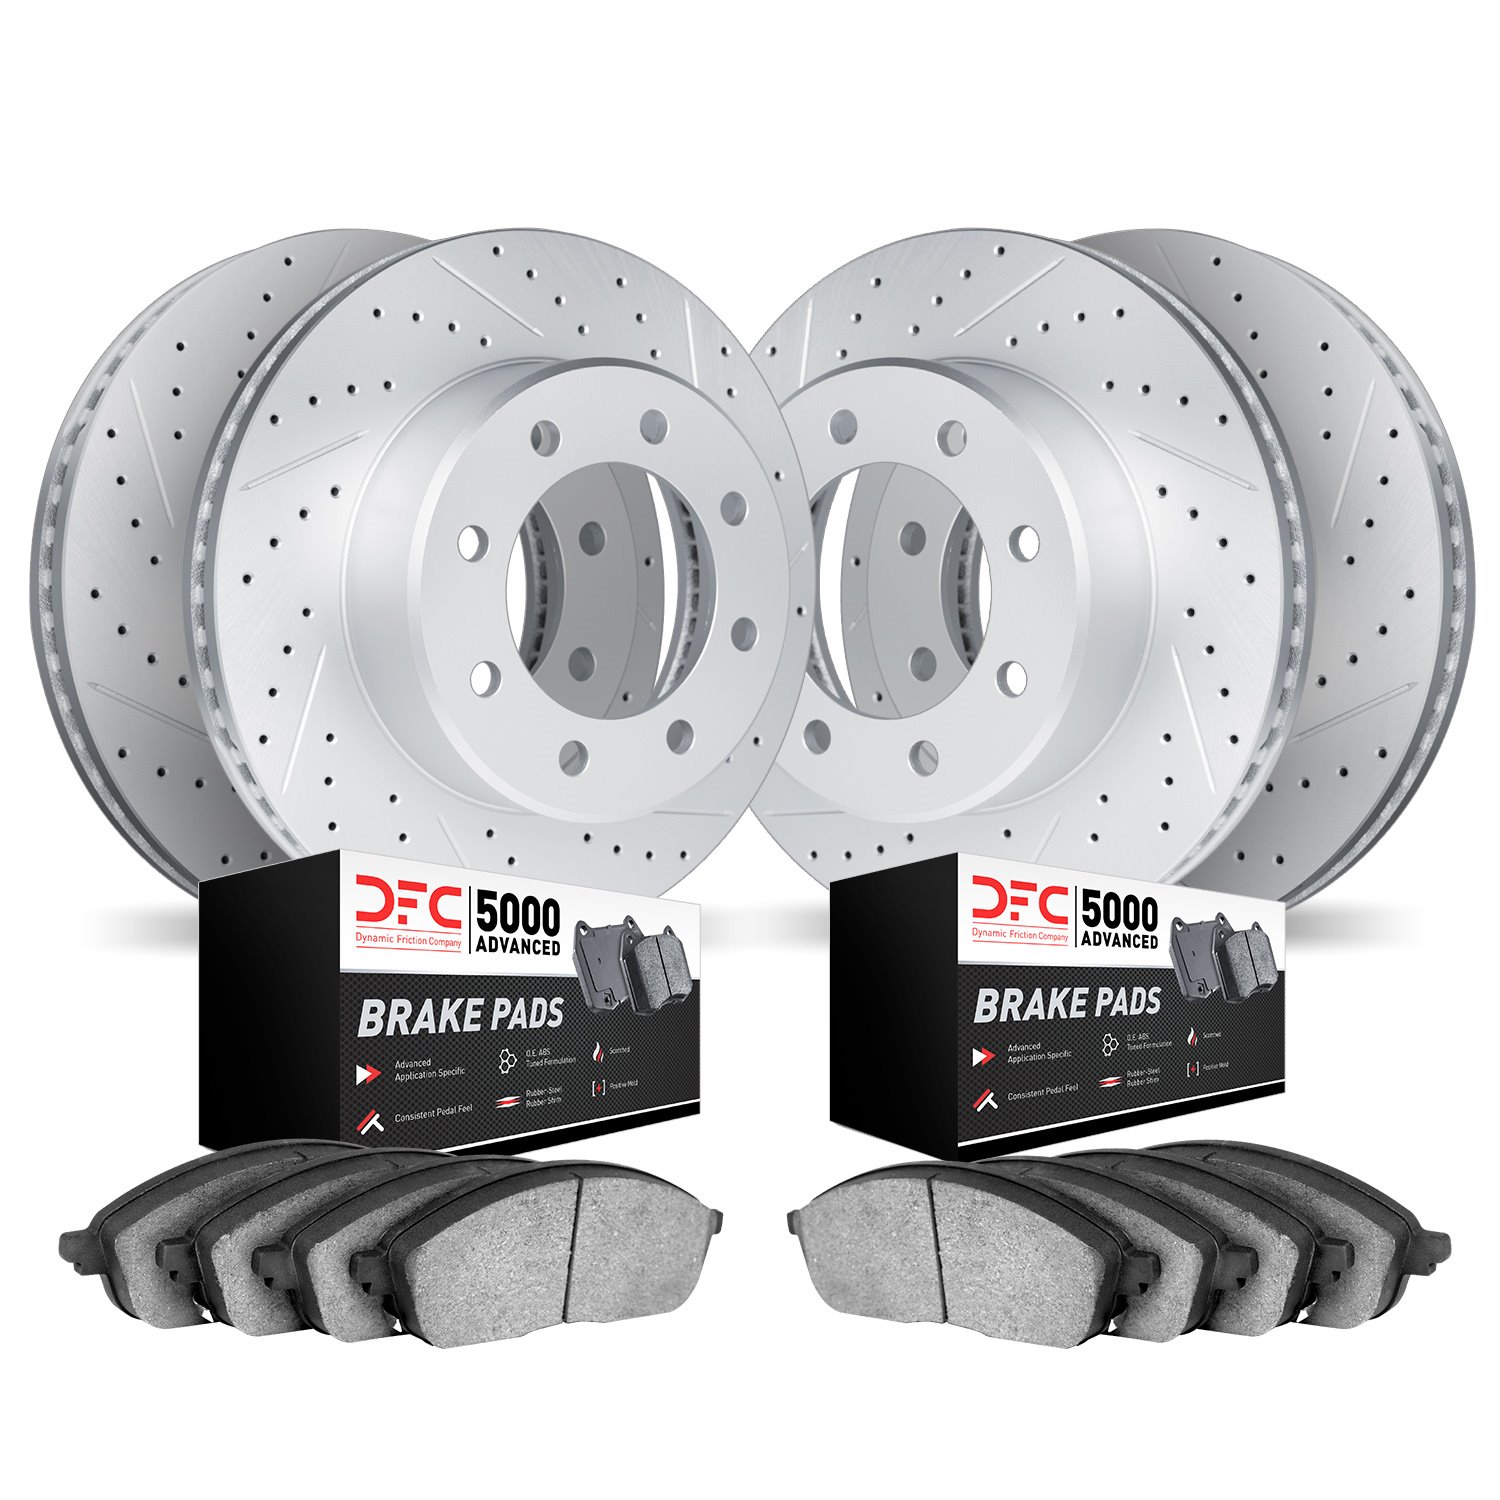 2504-54232 Geoperformance Drilled/Slotted Rotors w/5000 Advanced Brake Pads Kit, 1999-2004 Ford/Lincoln/Mercury/Mazda, Position: